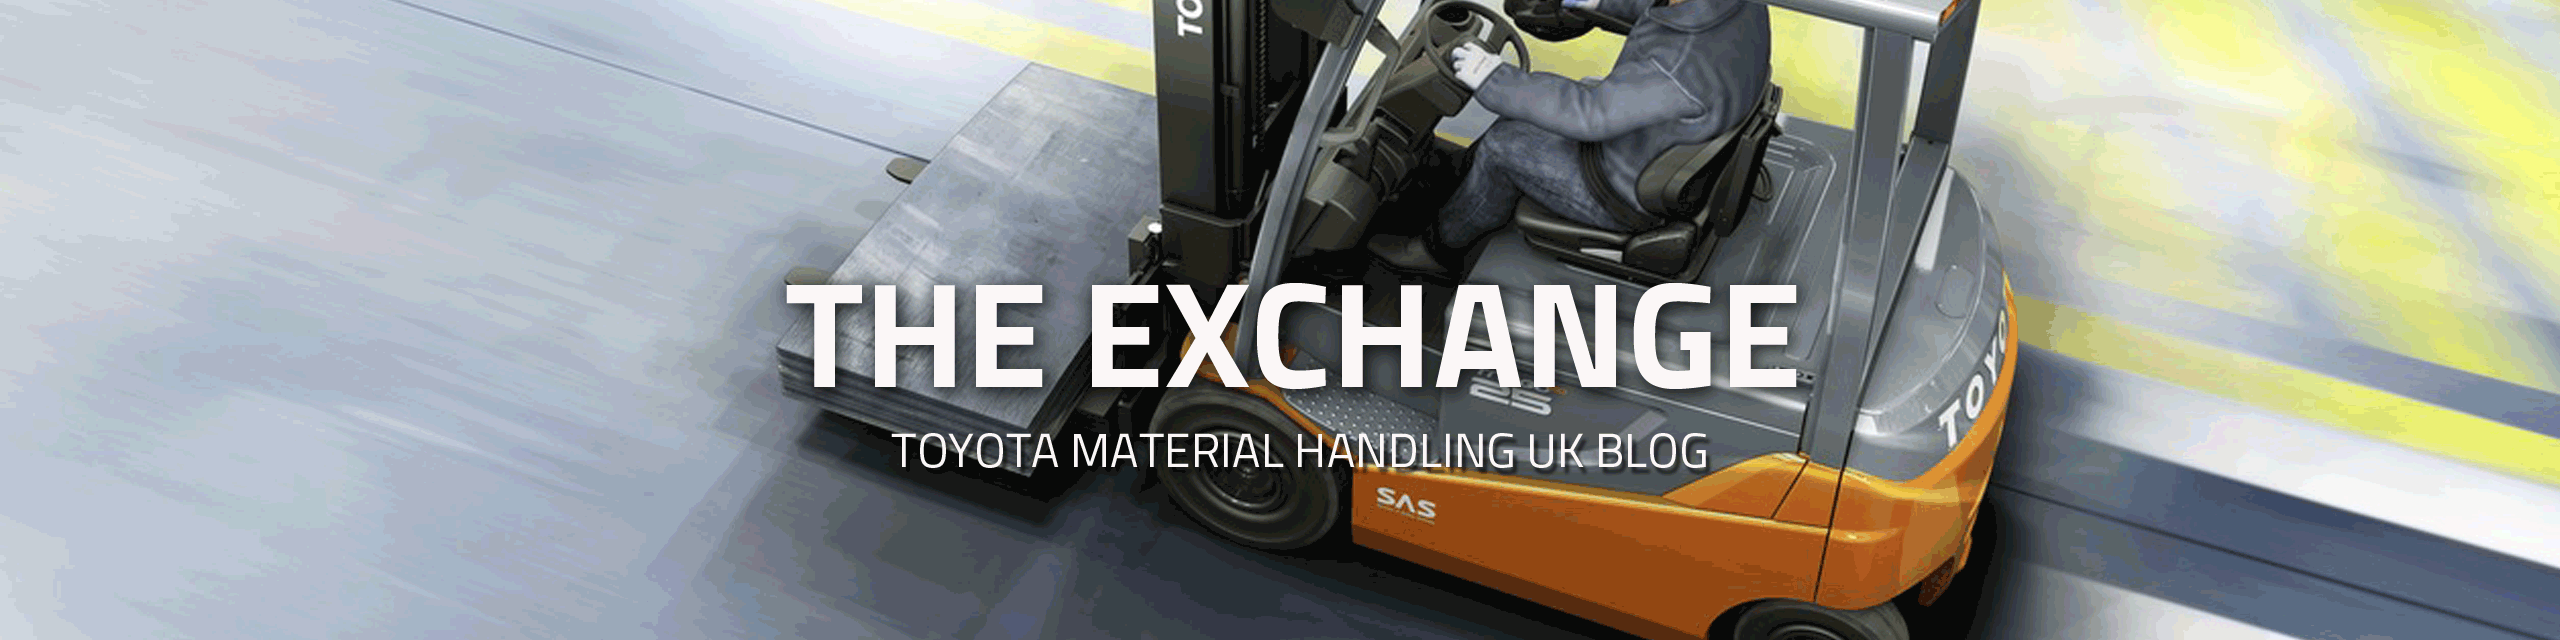 Keep Moving With Li Ion From Toyota Toyota Material Handling Uk Blog